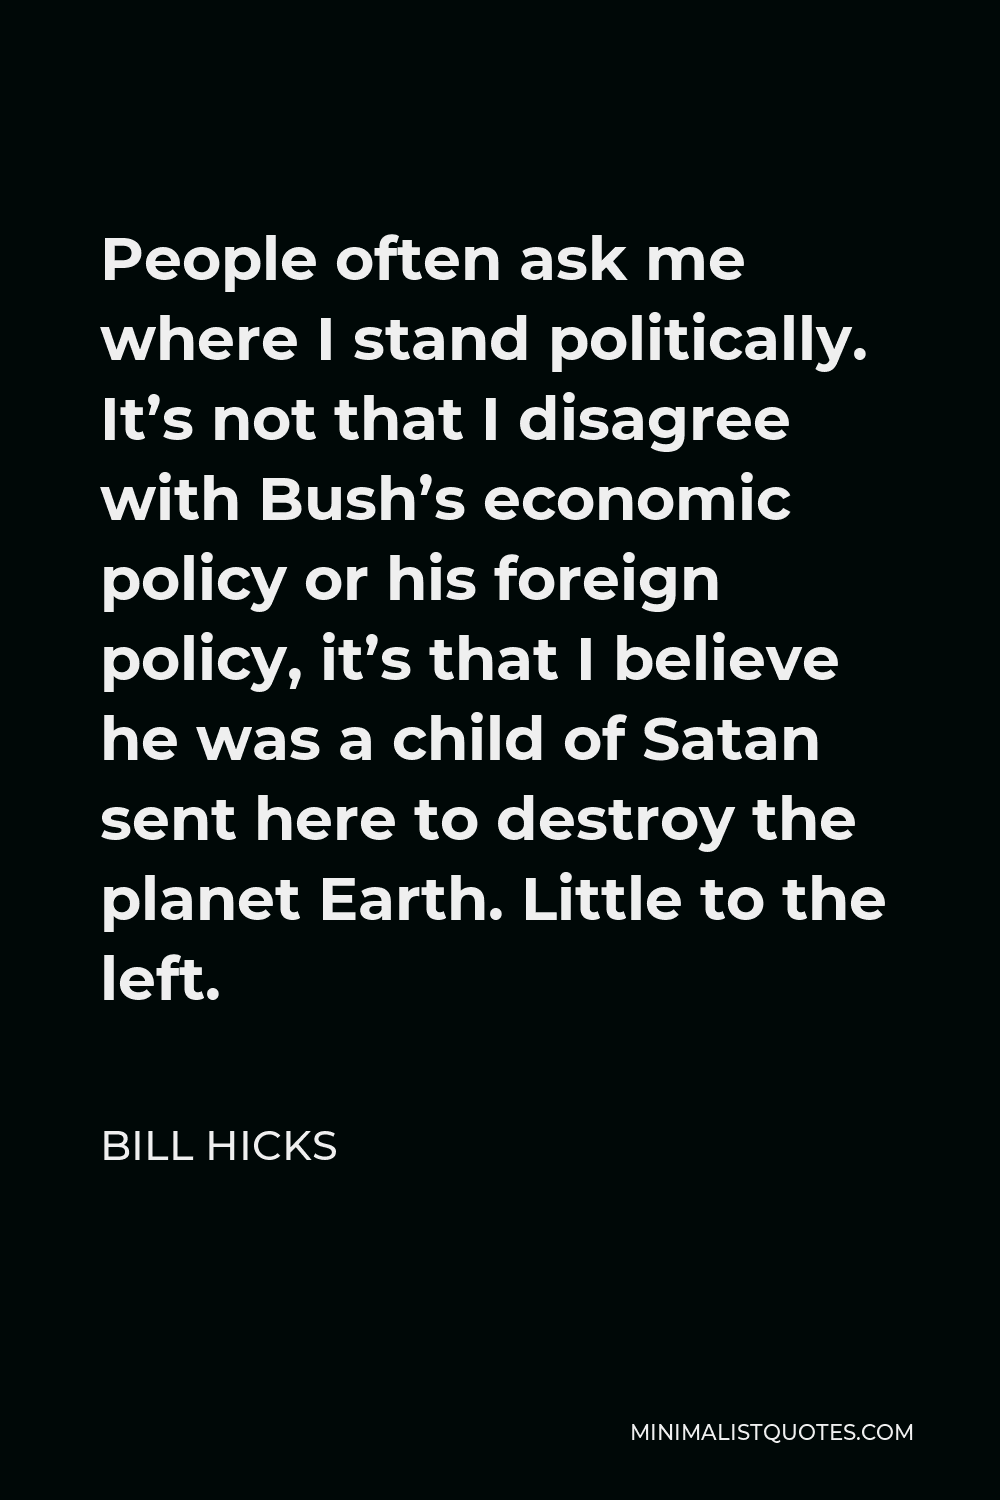 Bill Hicks Quote - People often ask me where I stand politically. It’s not that I disagree with Bush’s economic policy or his foreign policy, it’s that I believe he was a child of Satan sent here to destroy the planet Earth. Little to the left.